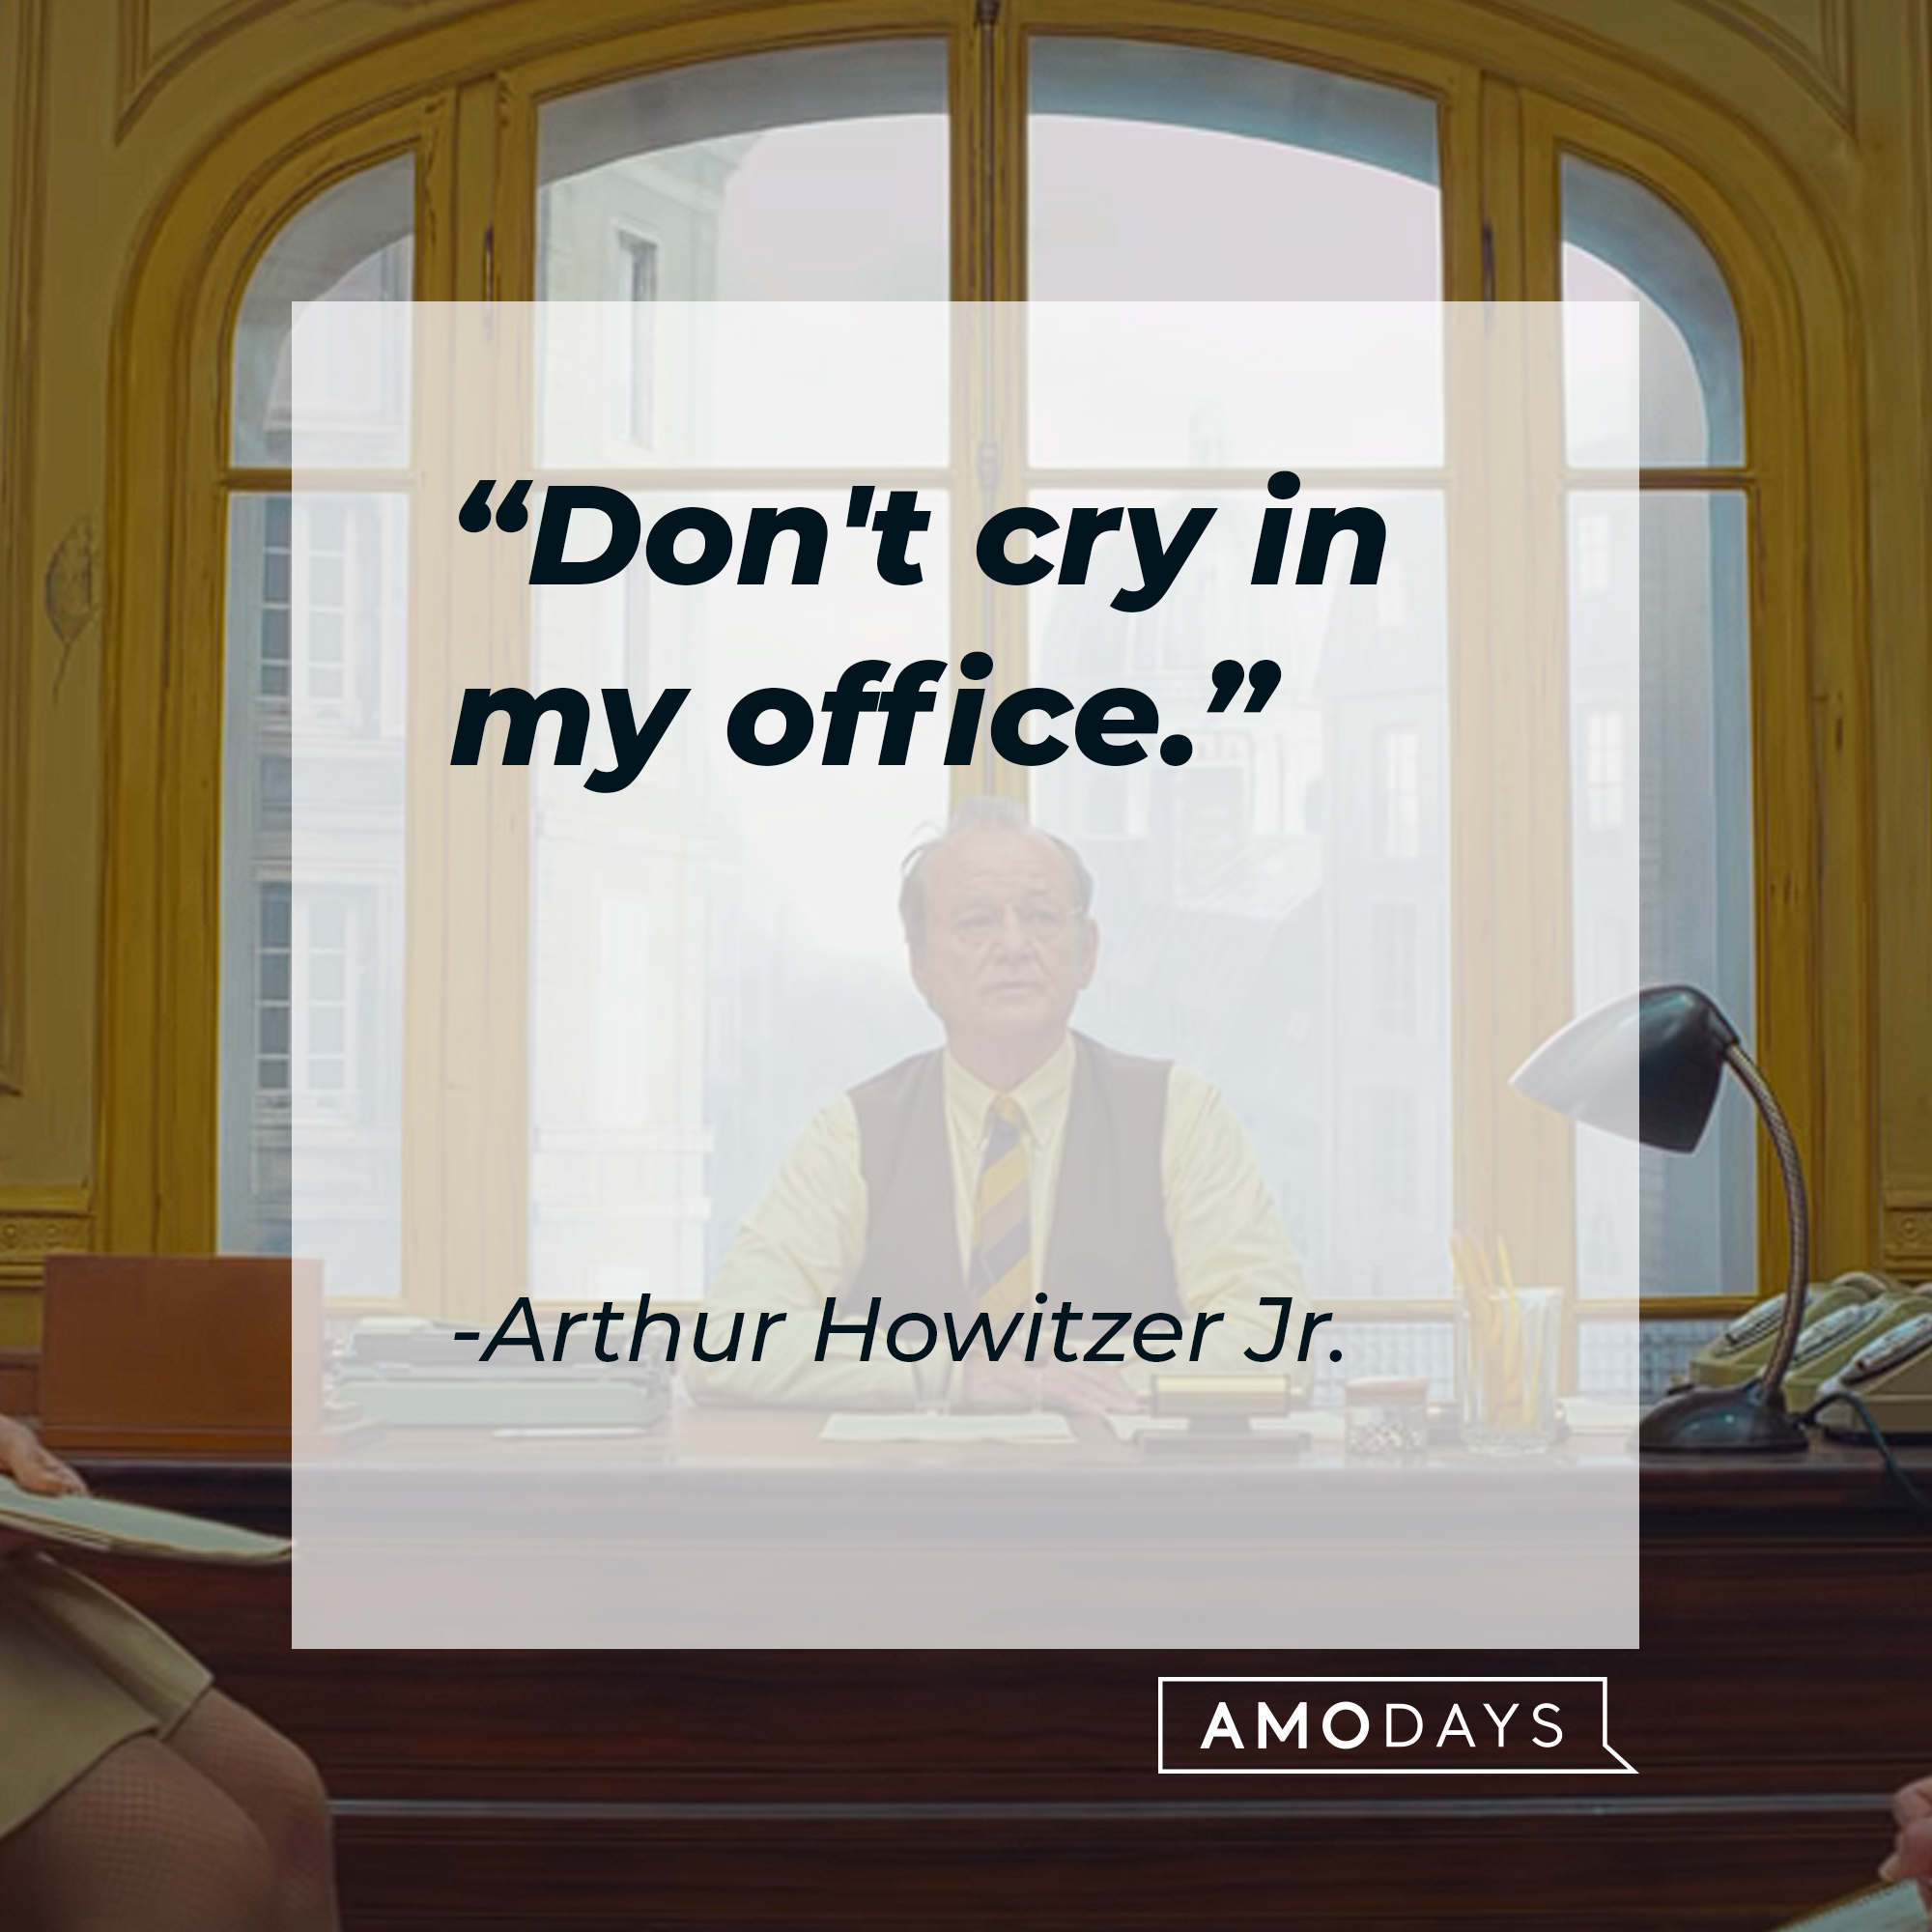 Arthur Howitzer Jr.'s quote: "Don't cry in my office." | Source: youtube.com/searchlightpictures